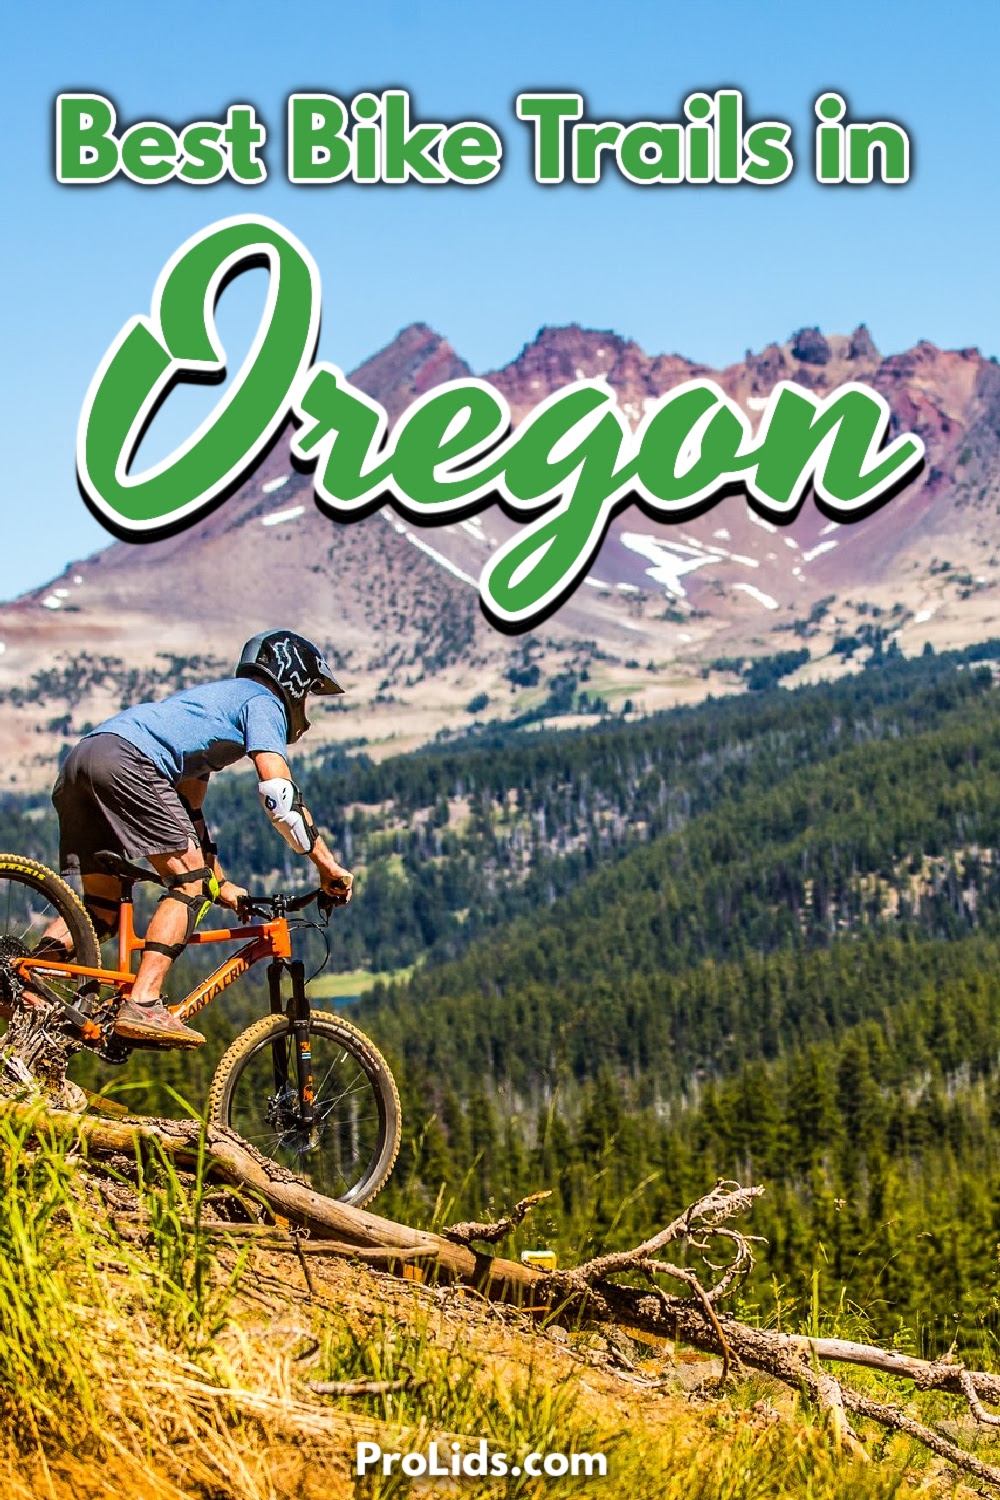 The best bike trails in Oregon offer scenic views that can fill your morning, afternoon, or evening with beautiful memories.